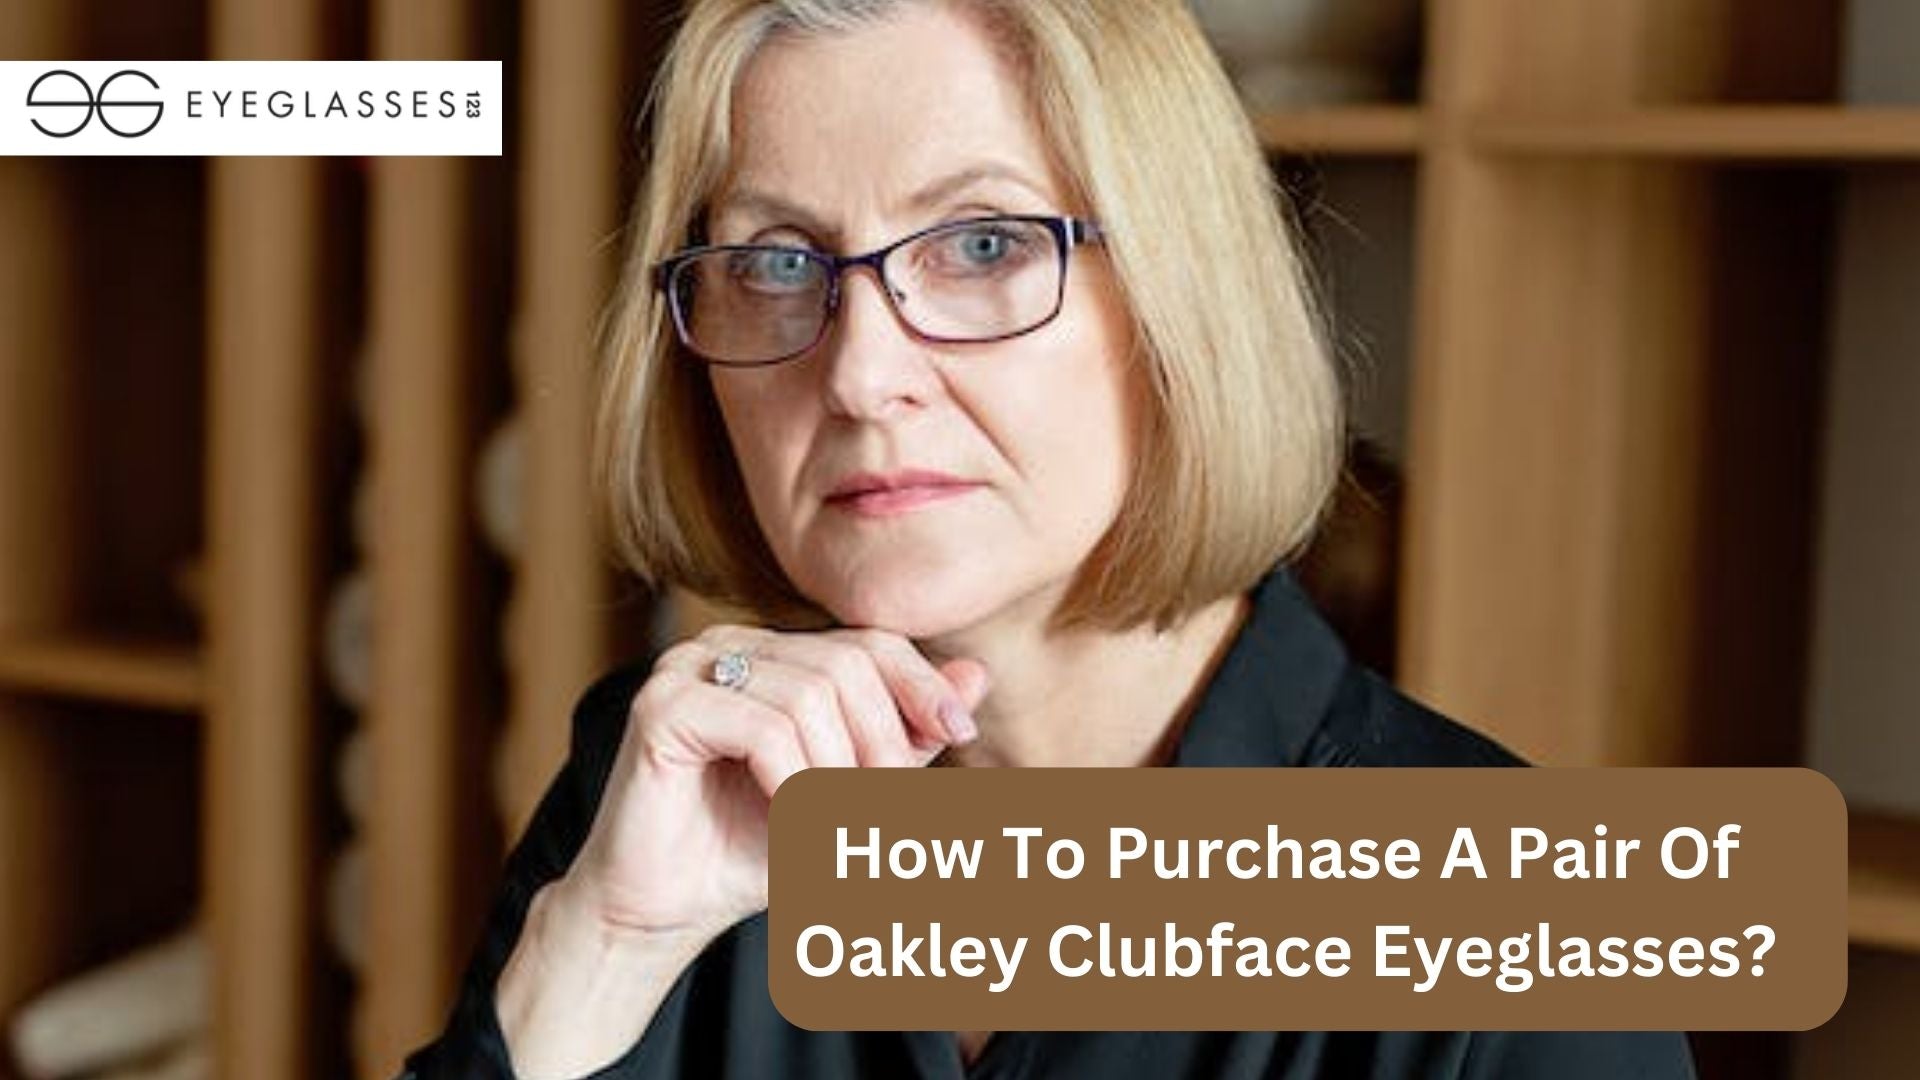 How To Purchase A Pair Of Oakley Clubface Eyeglasses?